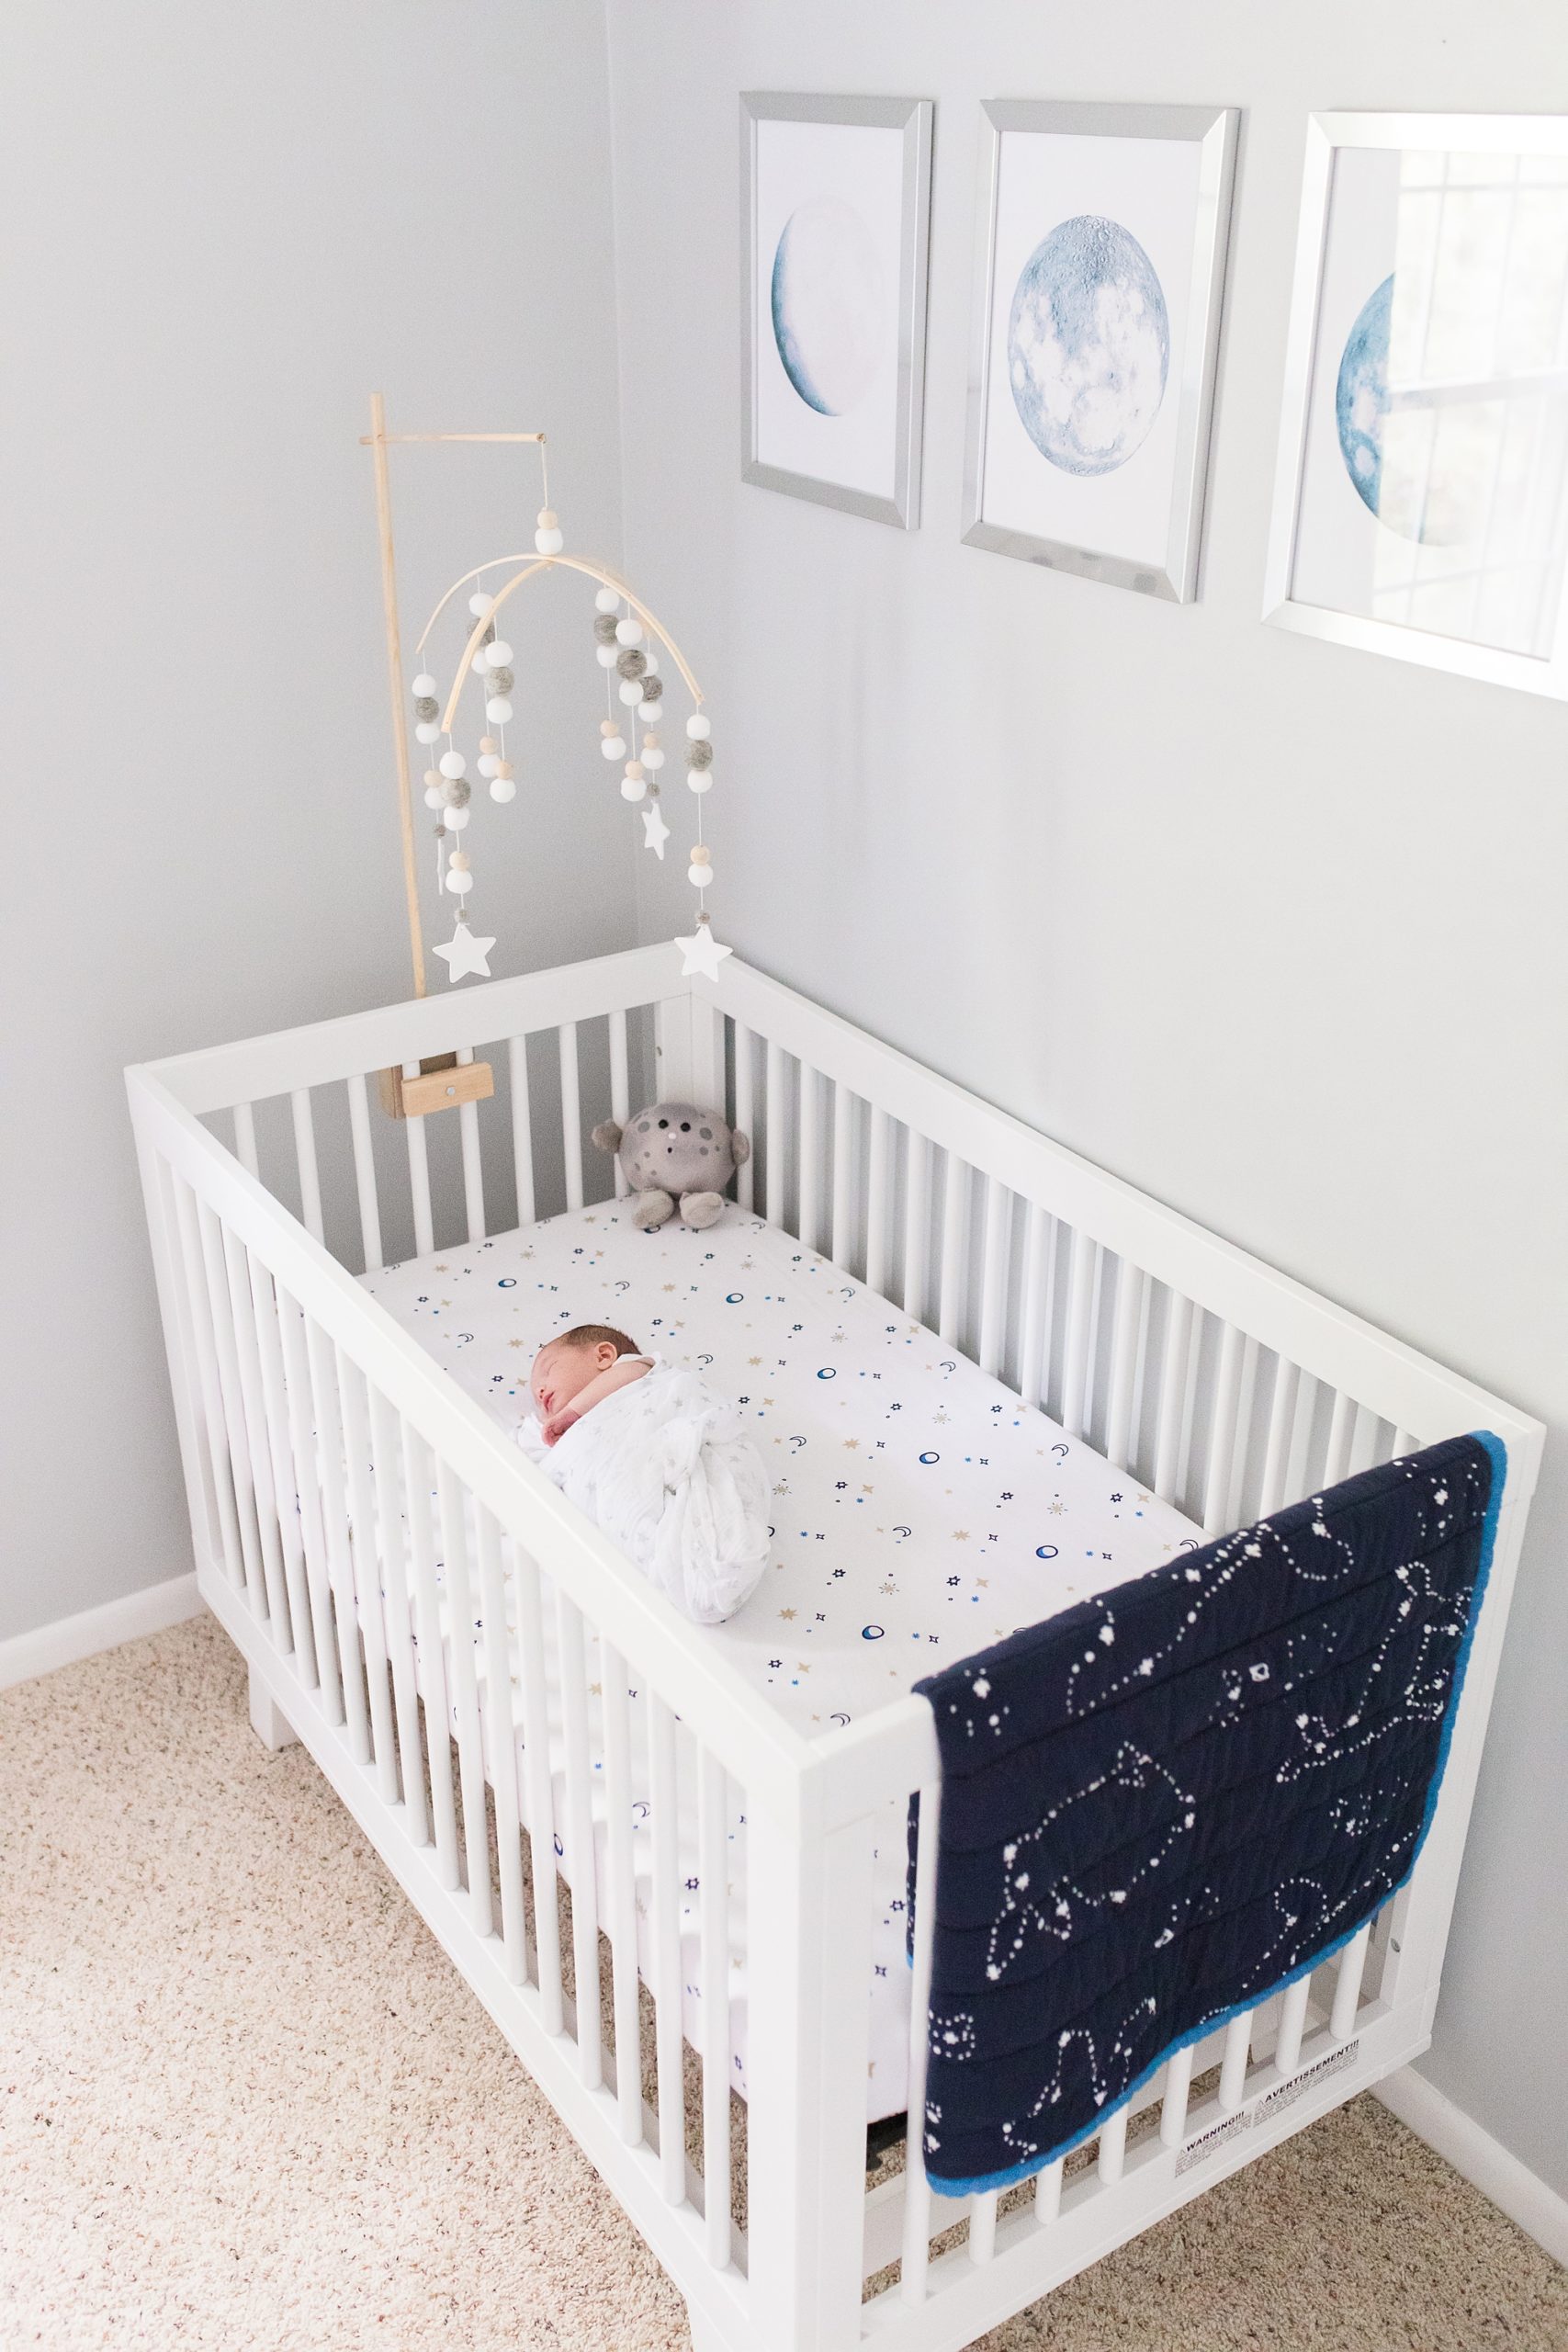 baby sleeps in crib during newborn photos at home | outfit ideas for lifestyle newborn photos